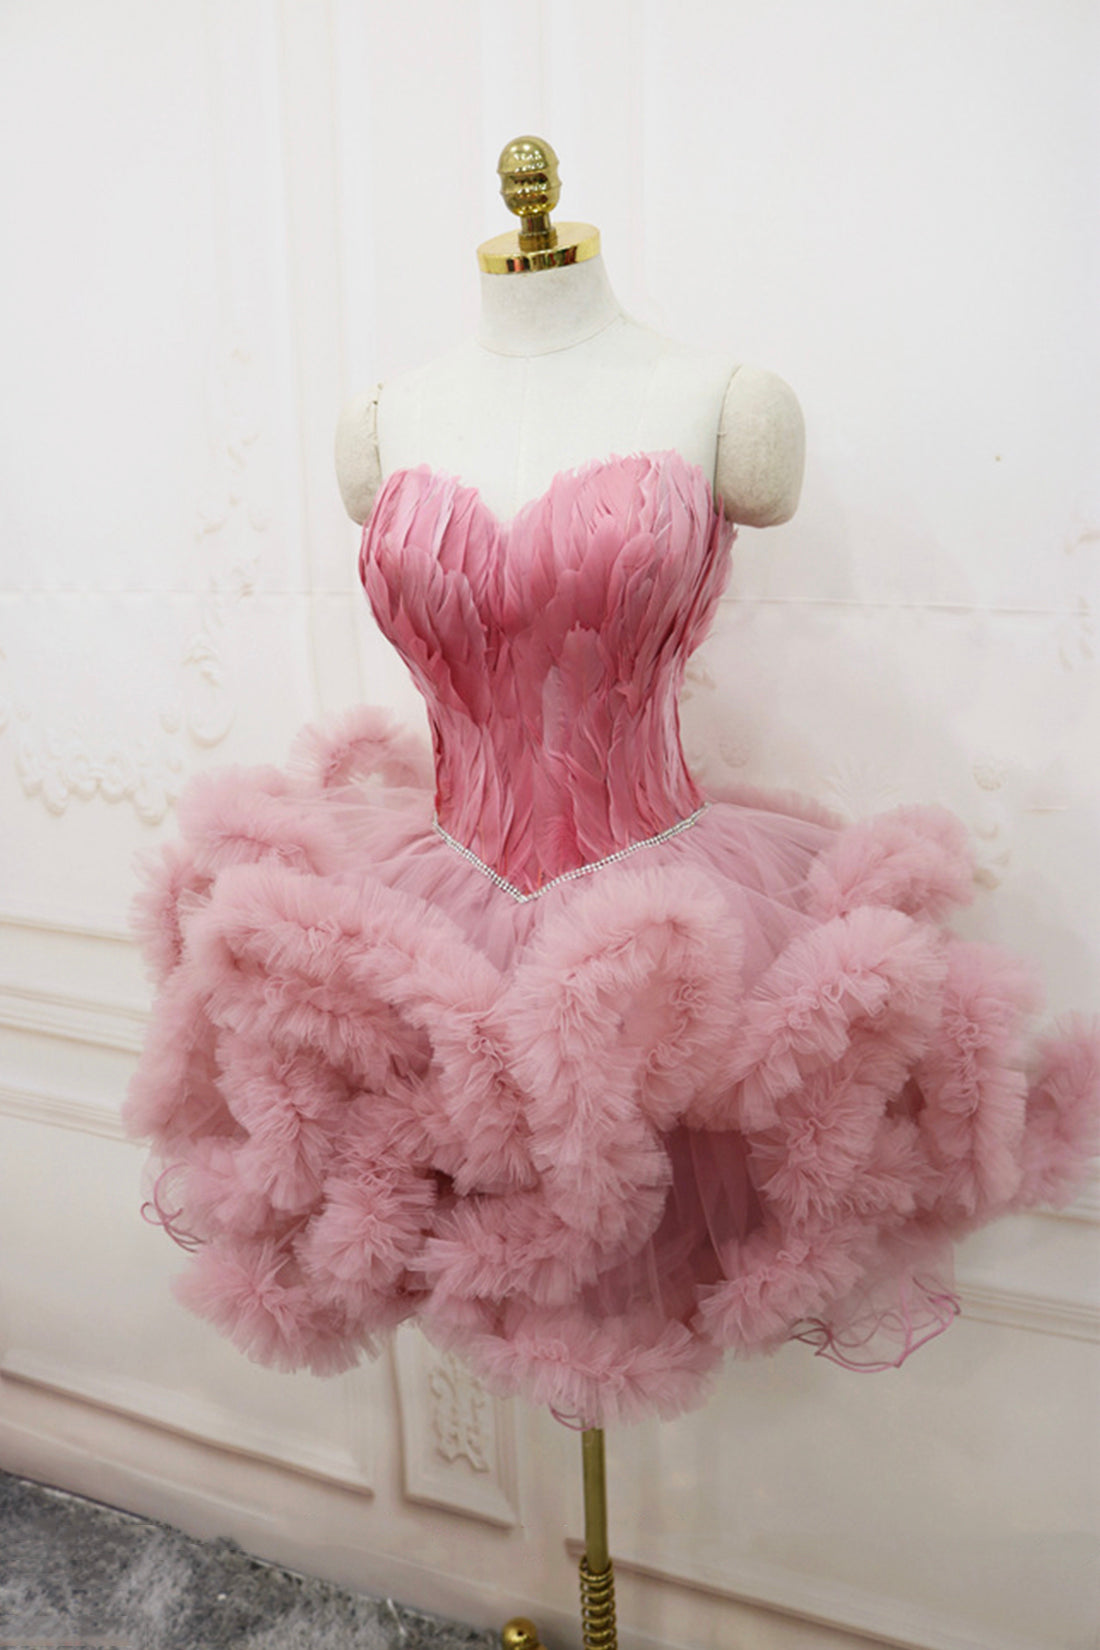 Bridesmaid Dress Fall, Pink Sweetheart Neck Tulle Party Dress, A Line Short Prom Dress with Feather